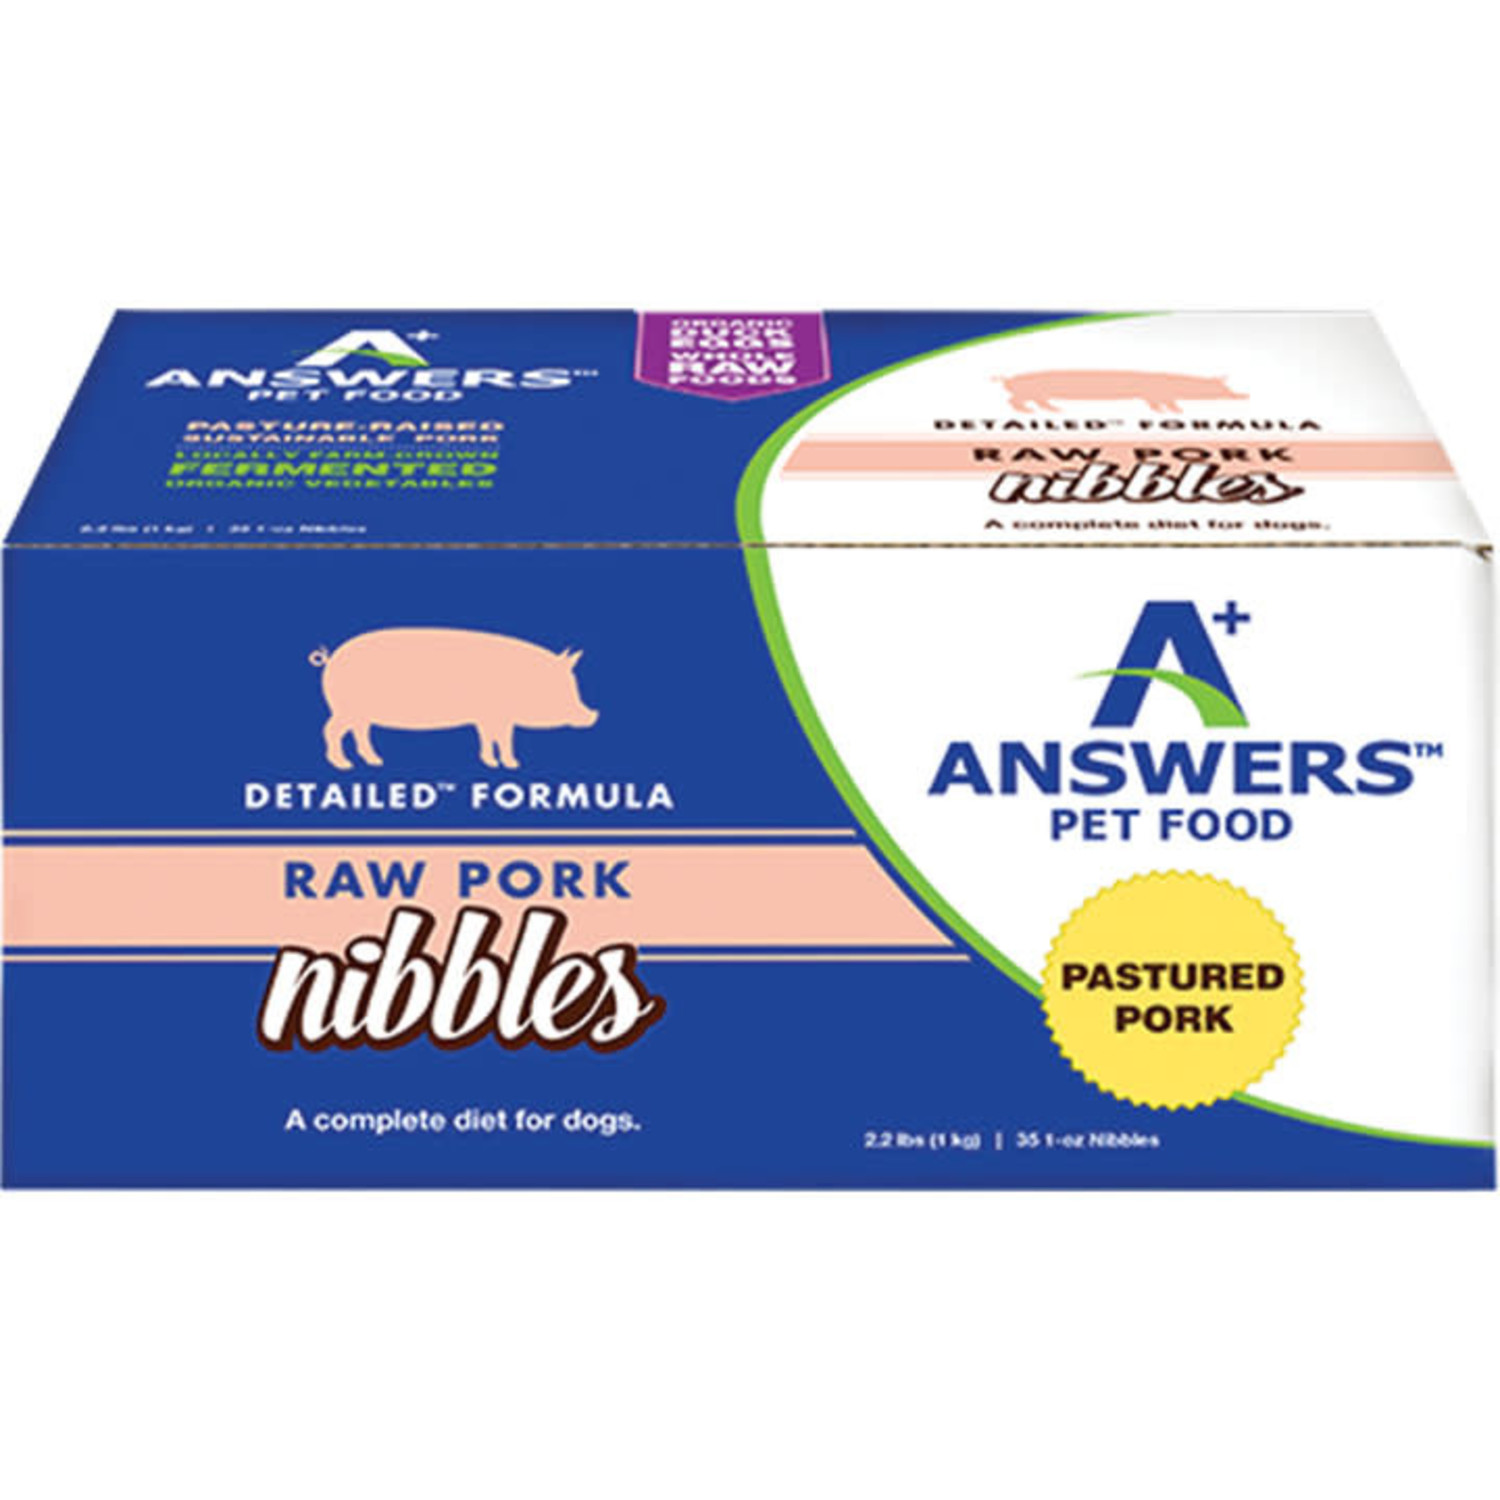 Answers Detailed Formula Raw Pork Nibbles Frozen Dog Food